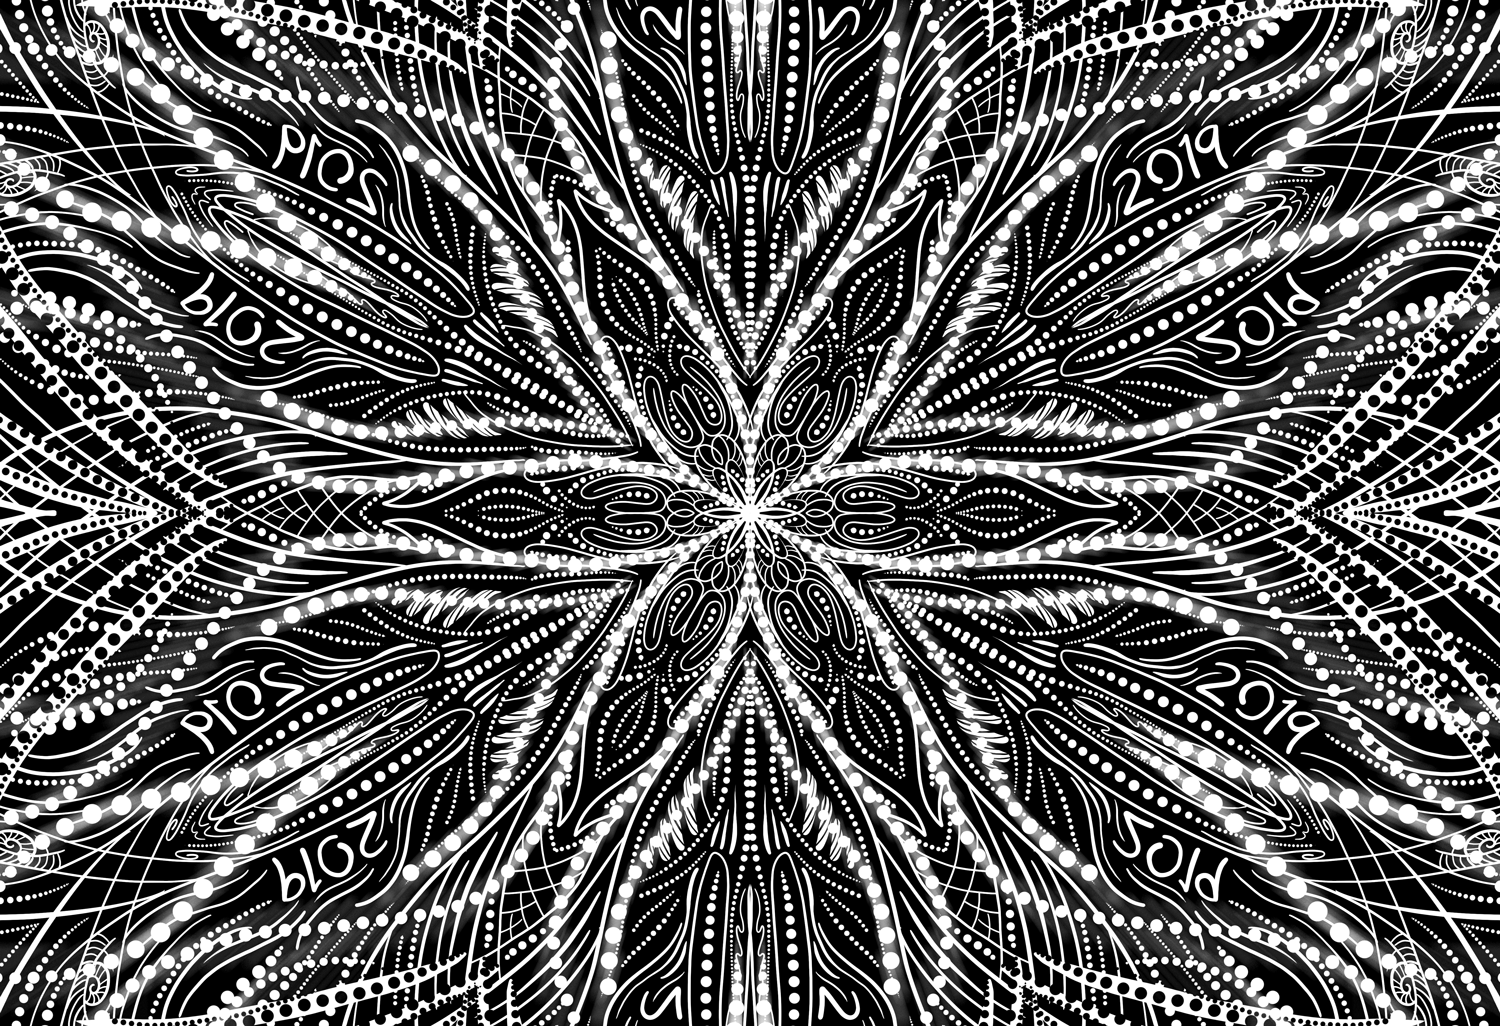 Spacing the brush to allow a dot pattern inside a mandala drawing in Photoshop